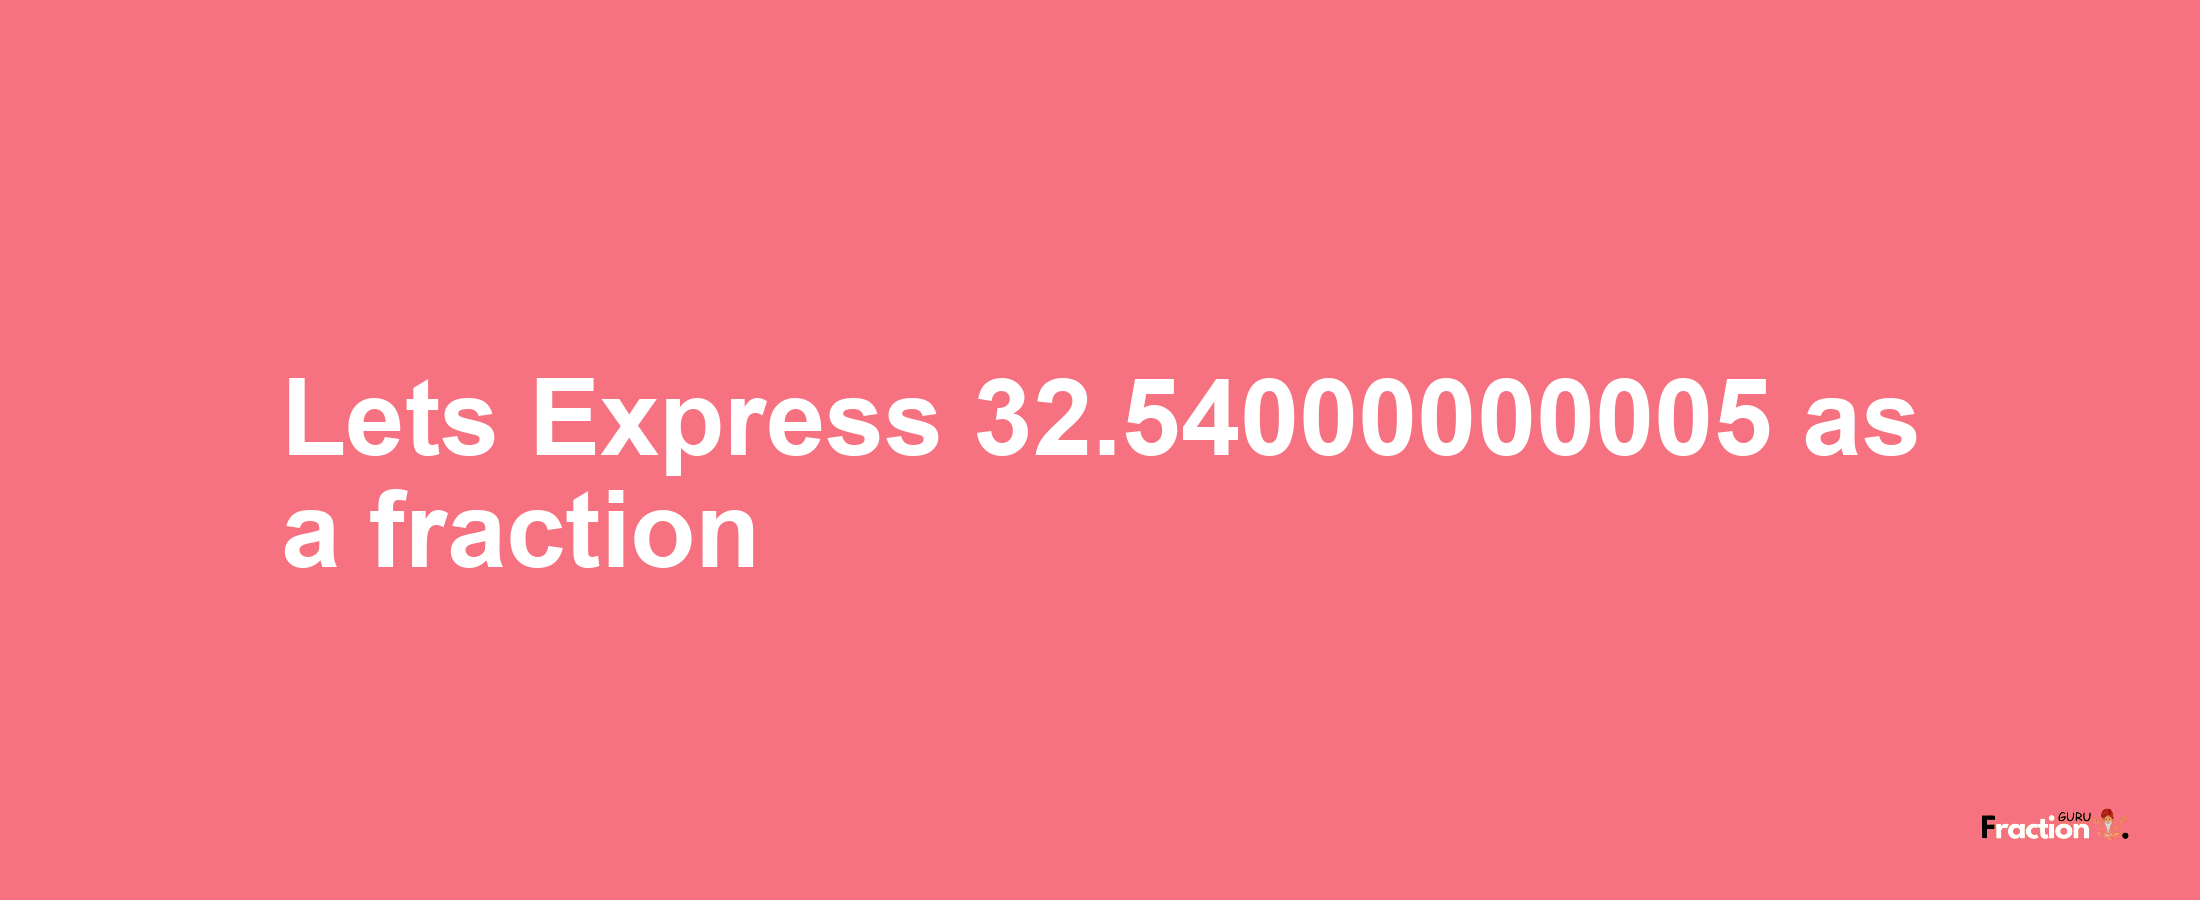 Lets Express 32.54000000005 as afraction